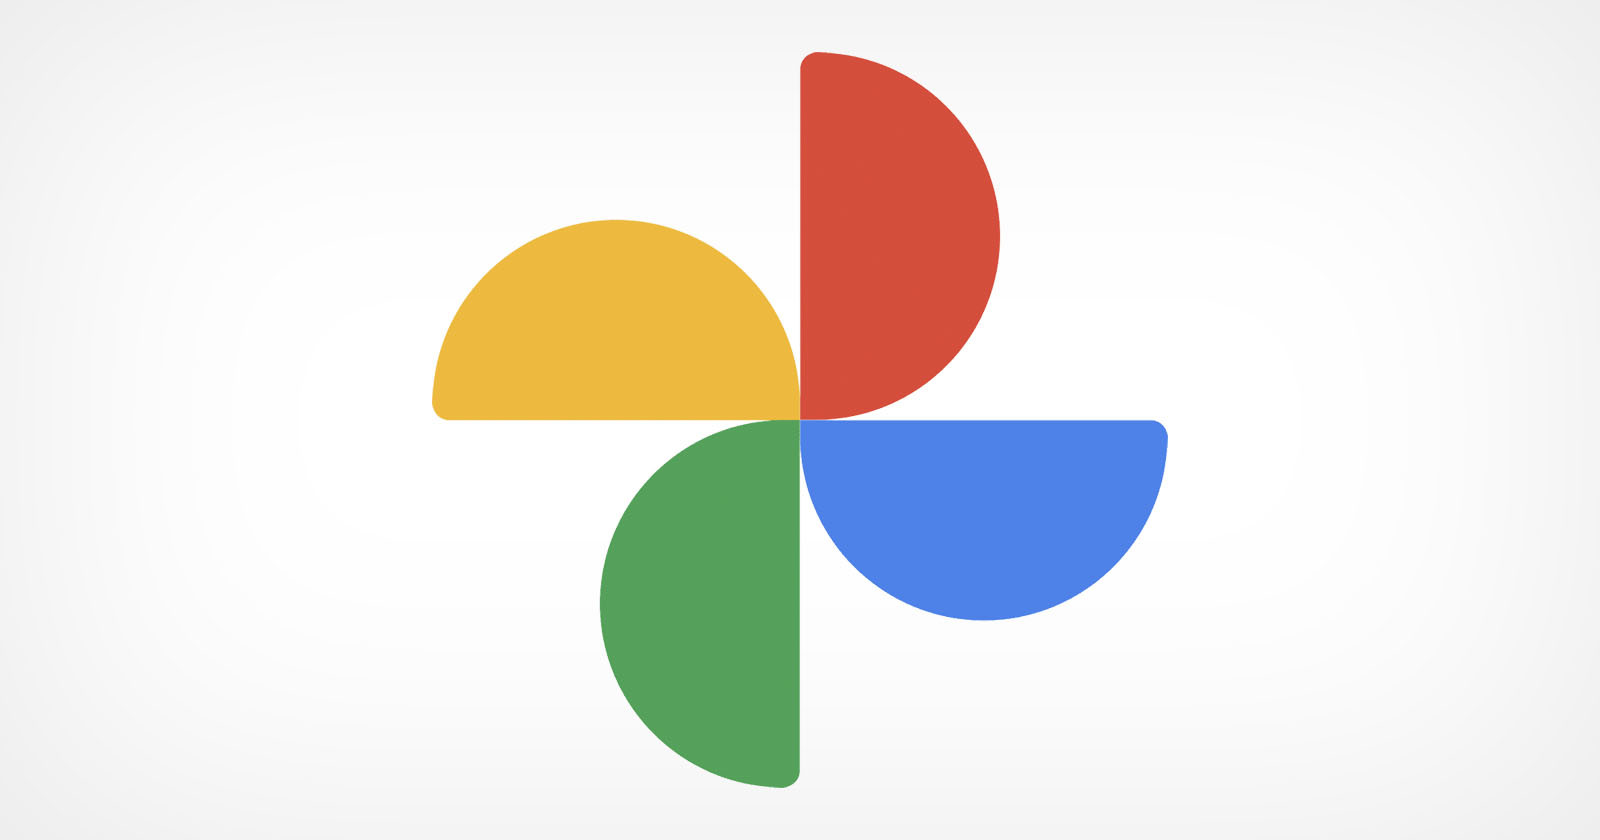  google photos testing better search supports complex 